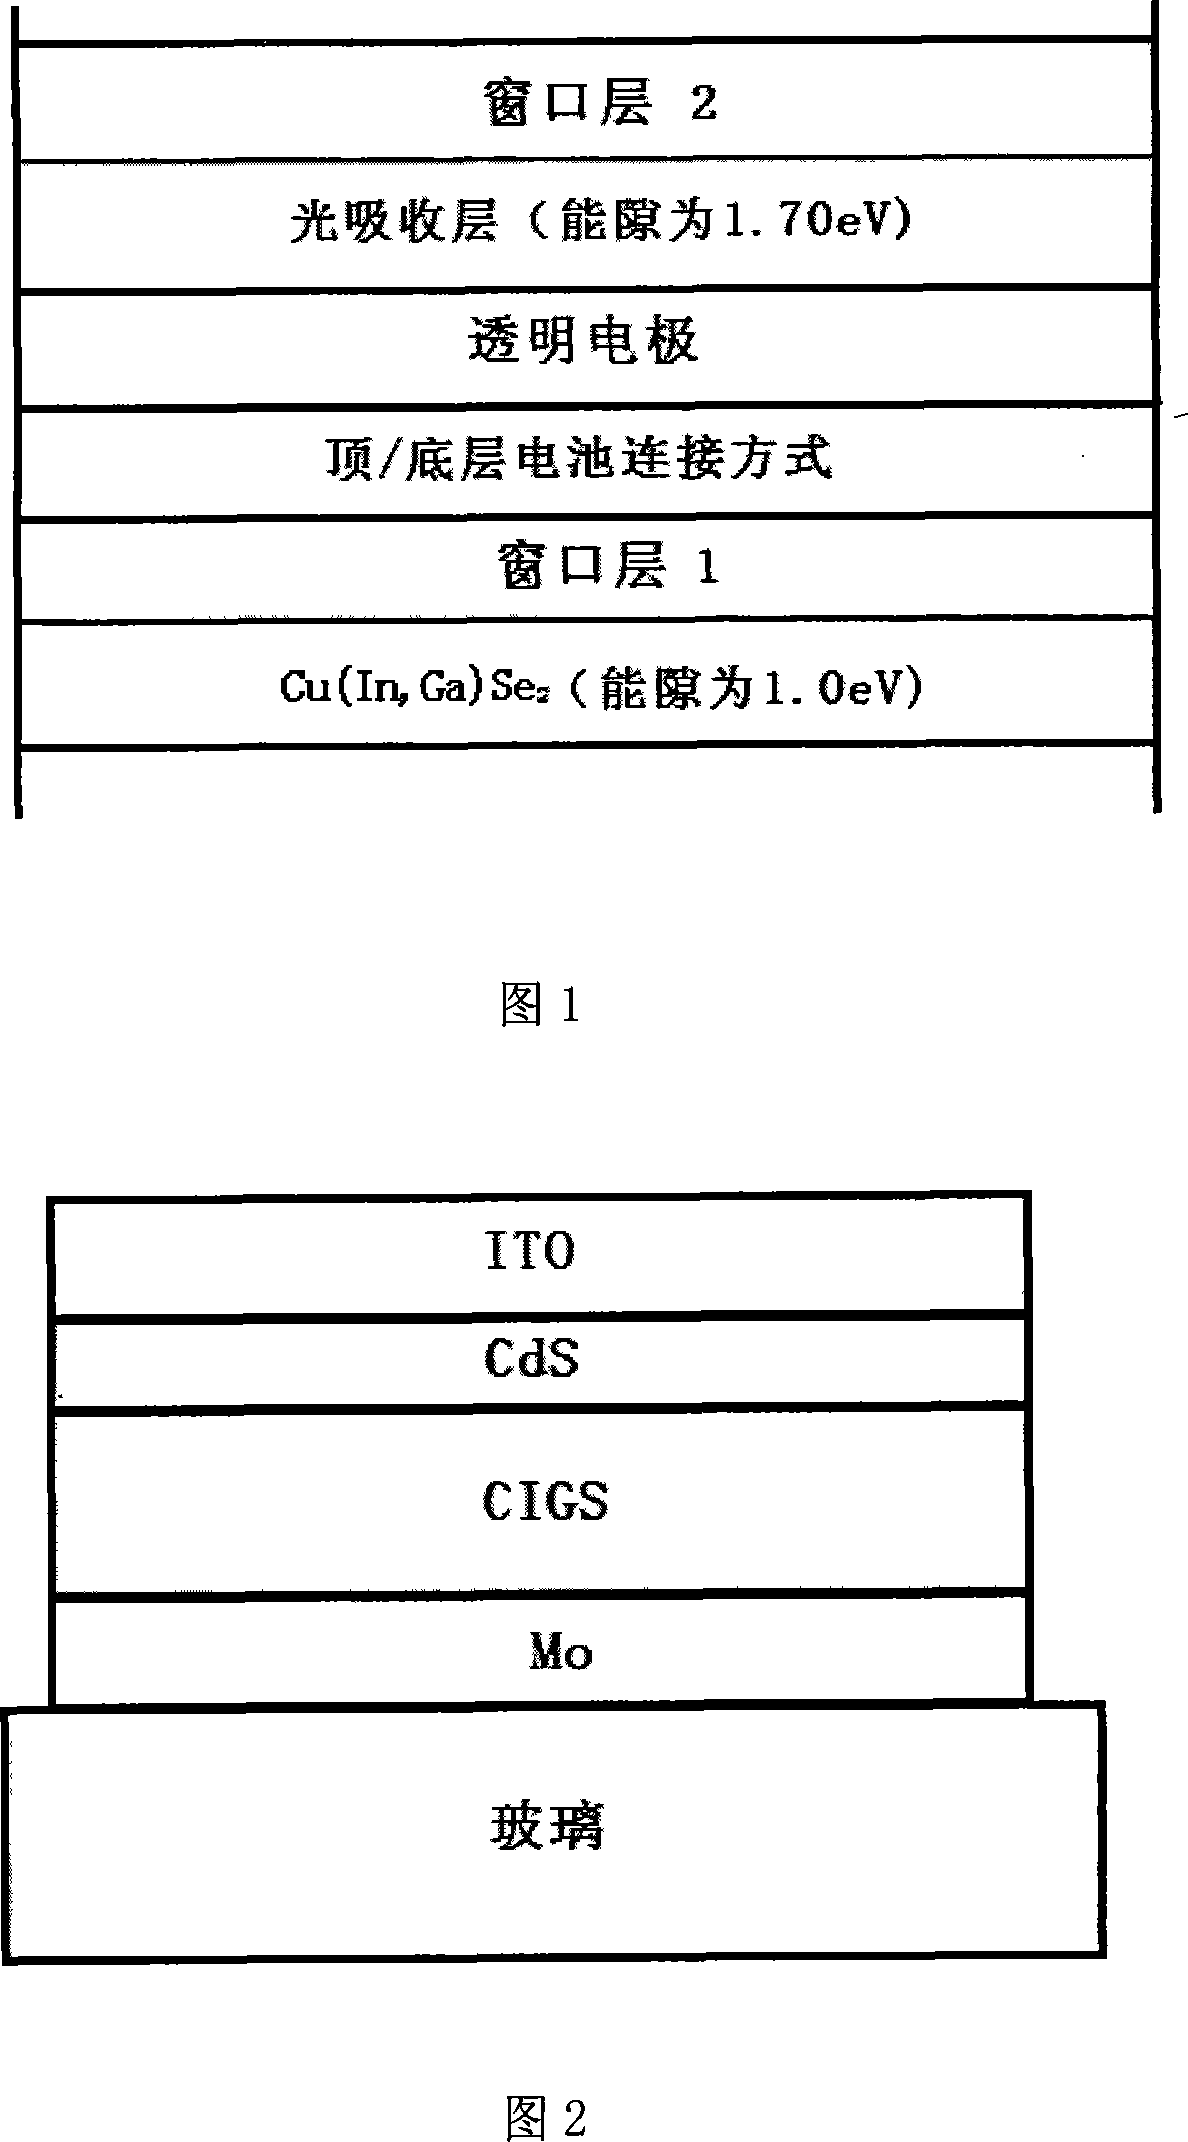 Highly-effective laminate solar battery and method for making same